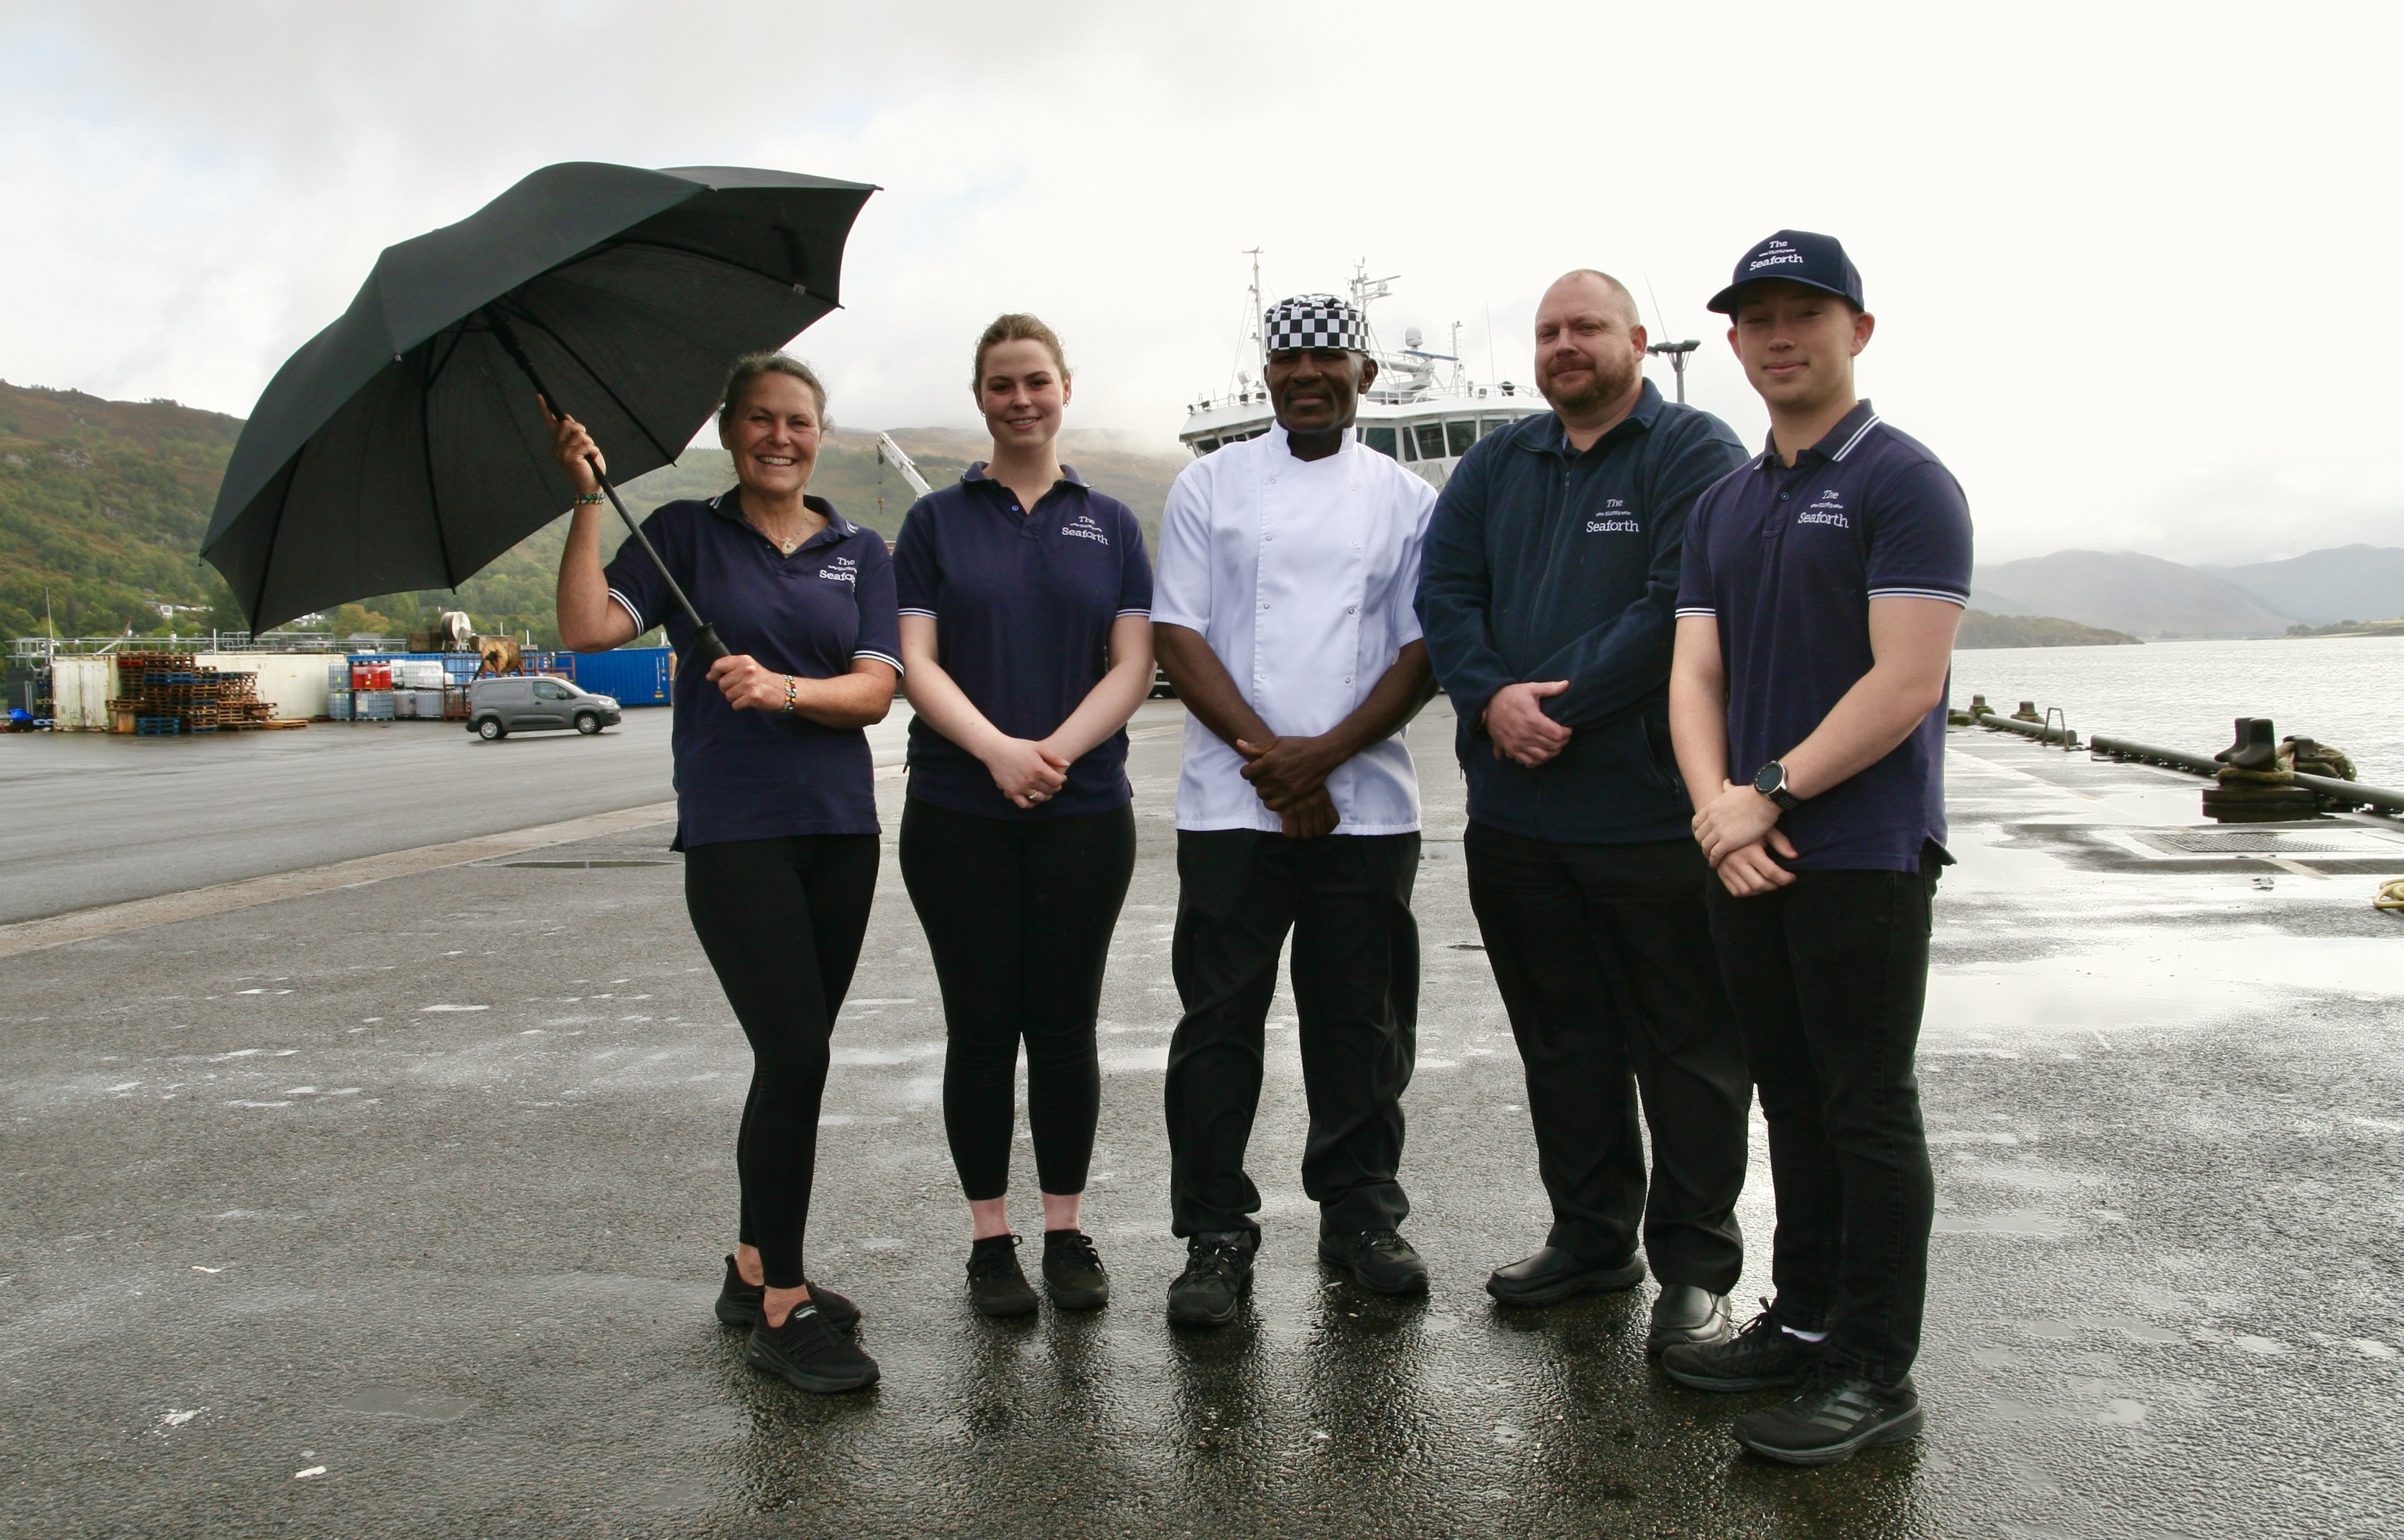 Highland business ends hospitality staffing crisis with 'wok to live' scheme